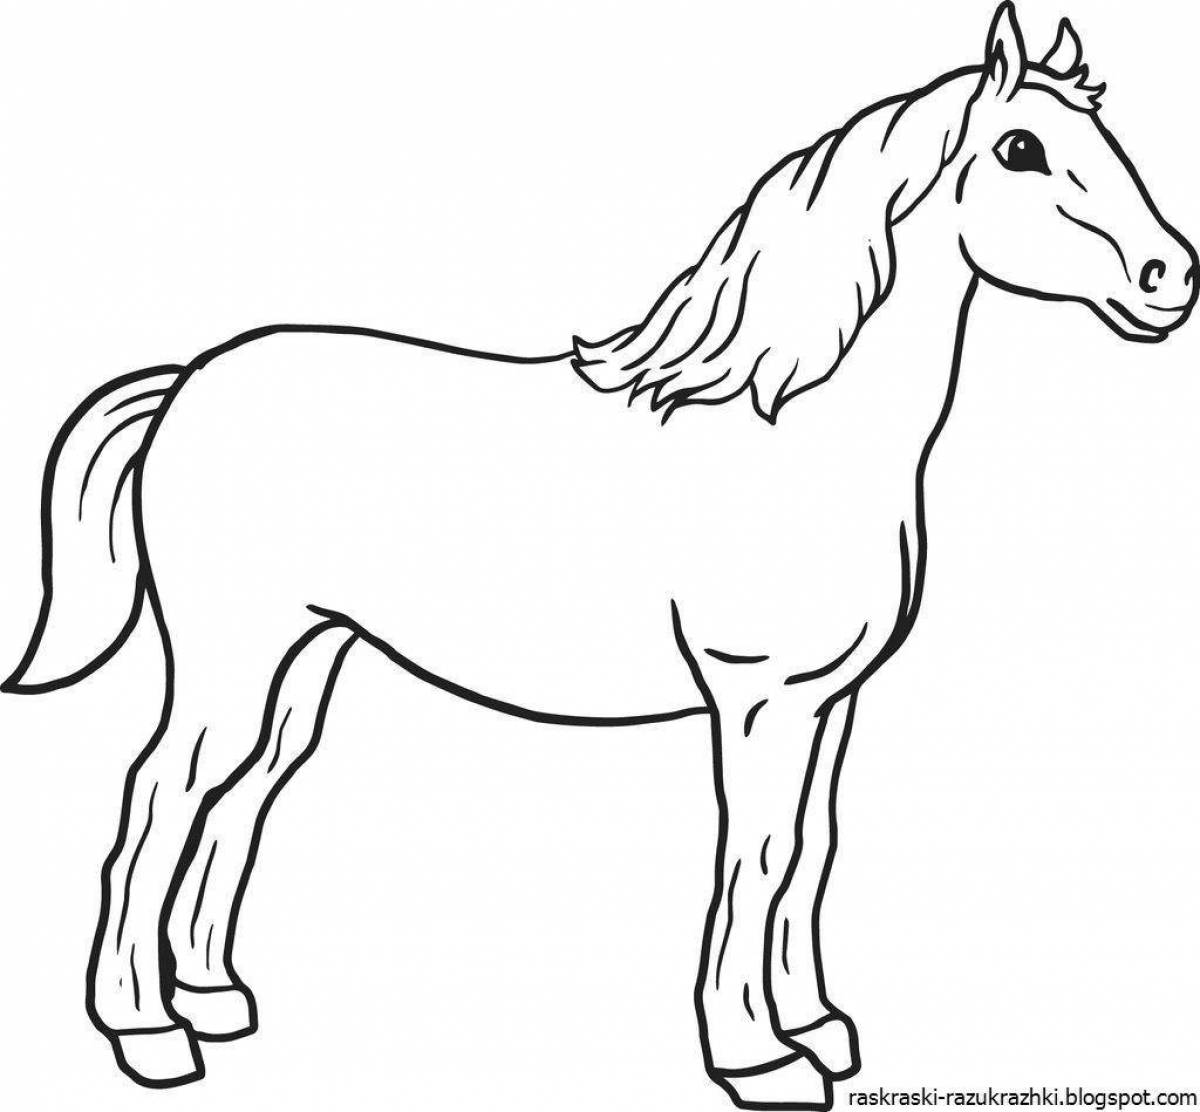 Exotic horse coloring book for children 4-5 years old